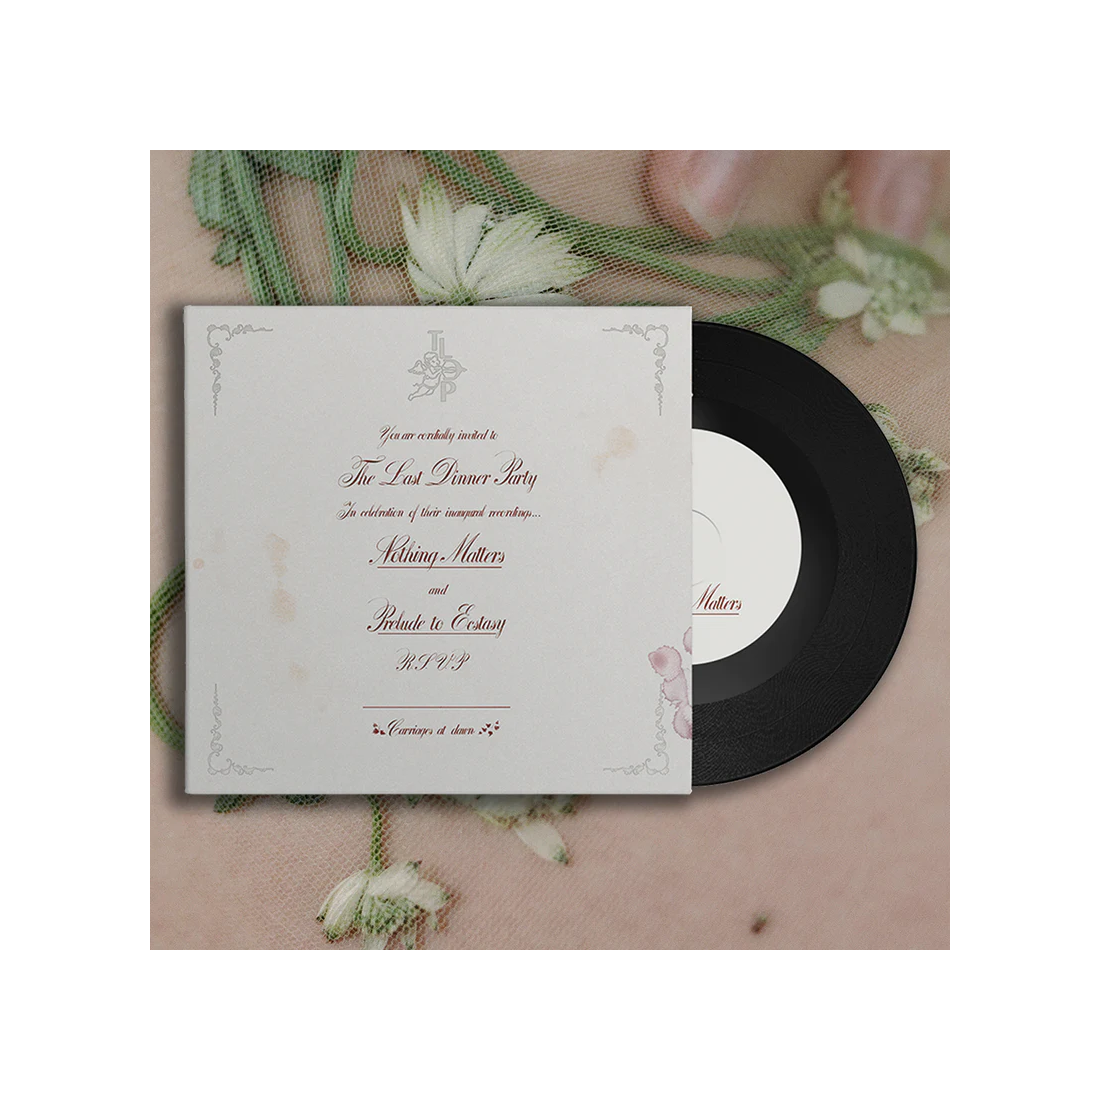 The Last Dinner Party - Nothing Matters: Limited Vinyl 7" Single